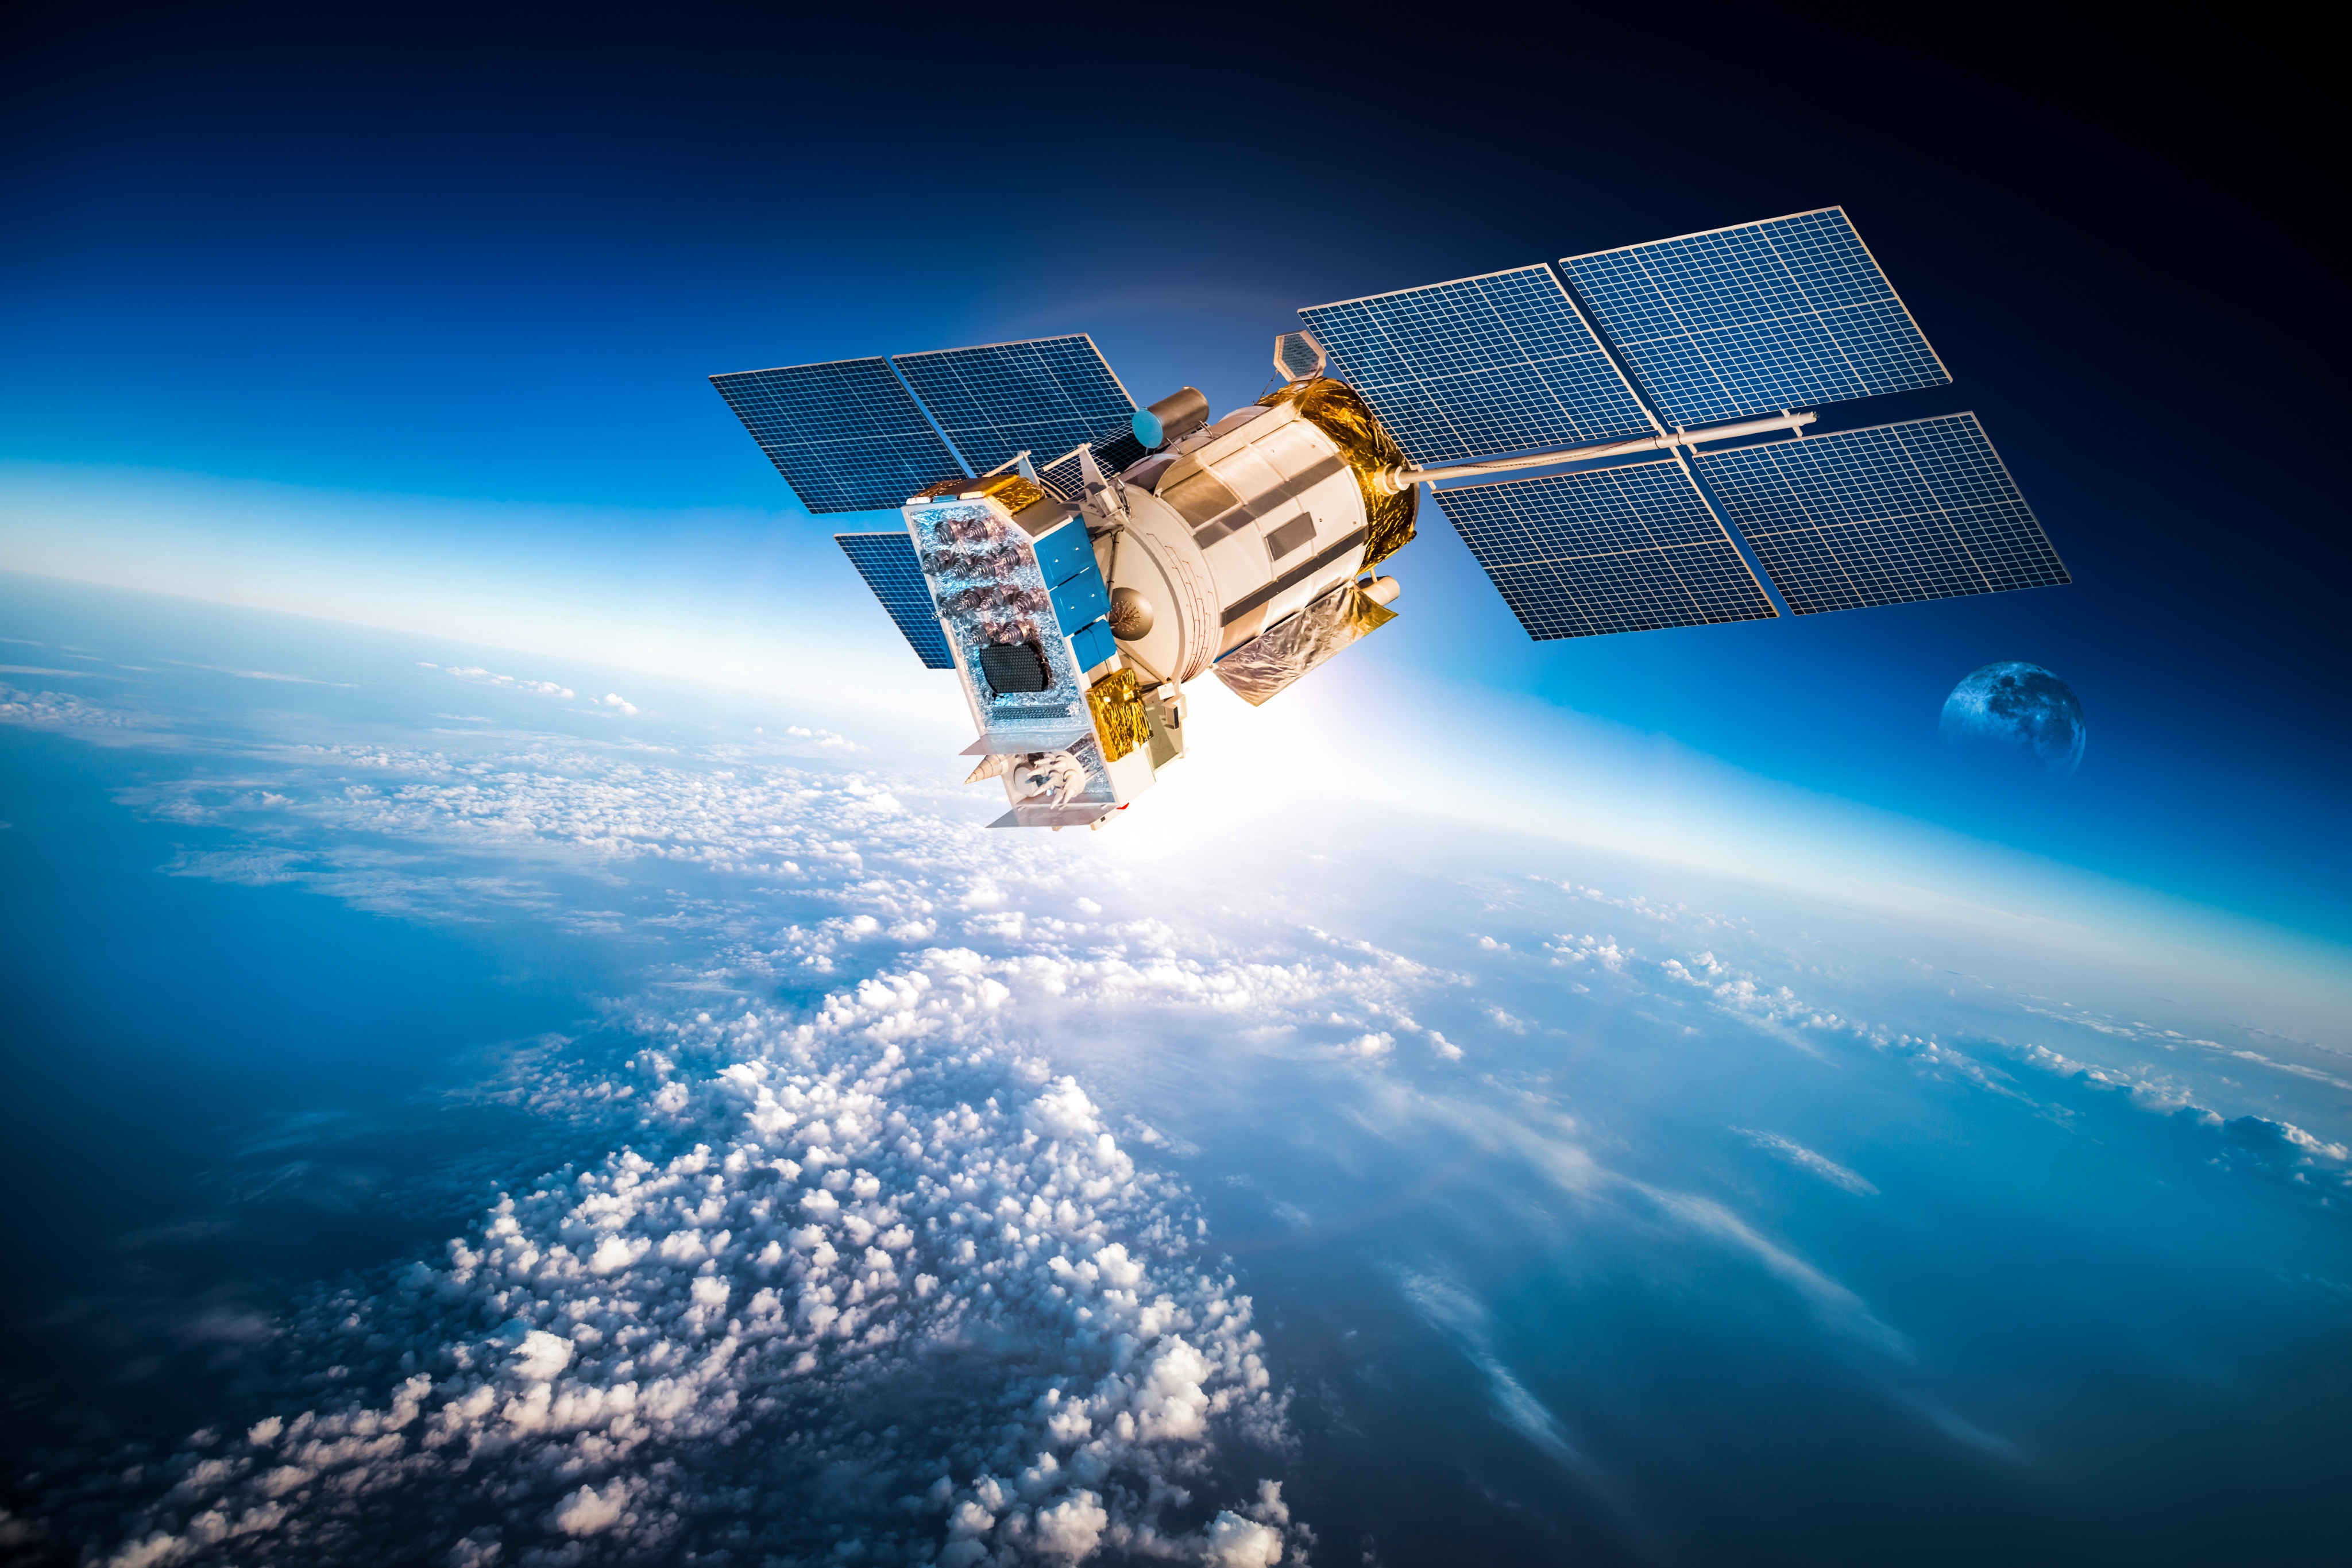 The companies – Quicksilver Manufacturing Inc., Rapid Cut LLC, and US Prototype Inc. – provide 3D printing services to customers that include manufacturers of space and defence technology. Photo illustration: Shutterstock